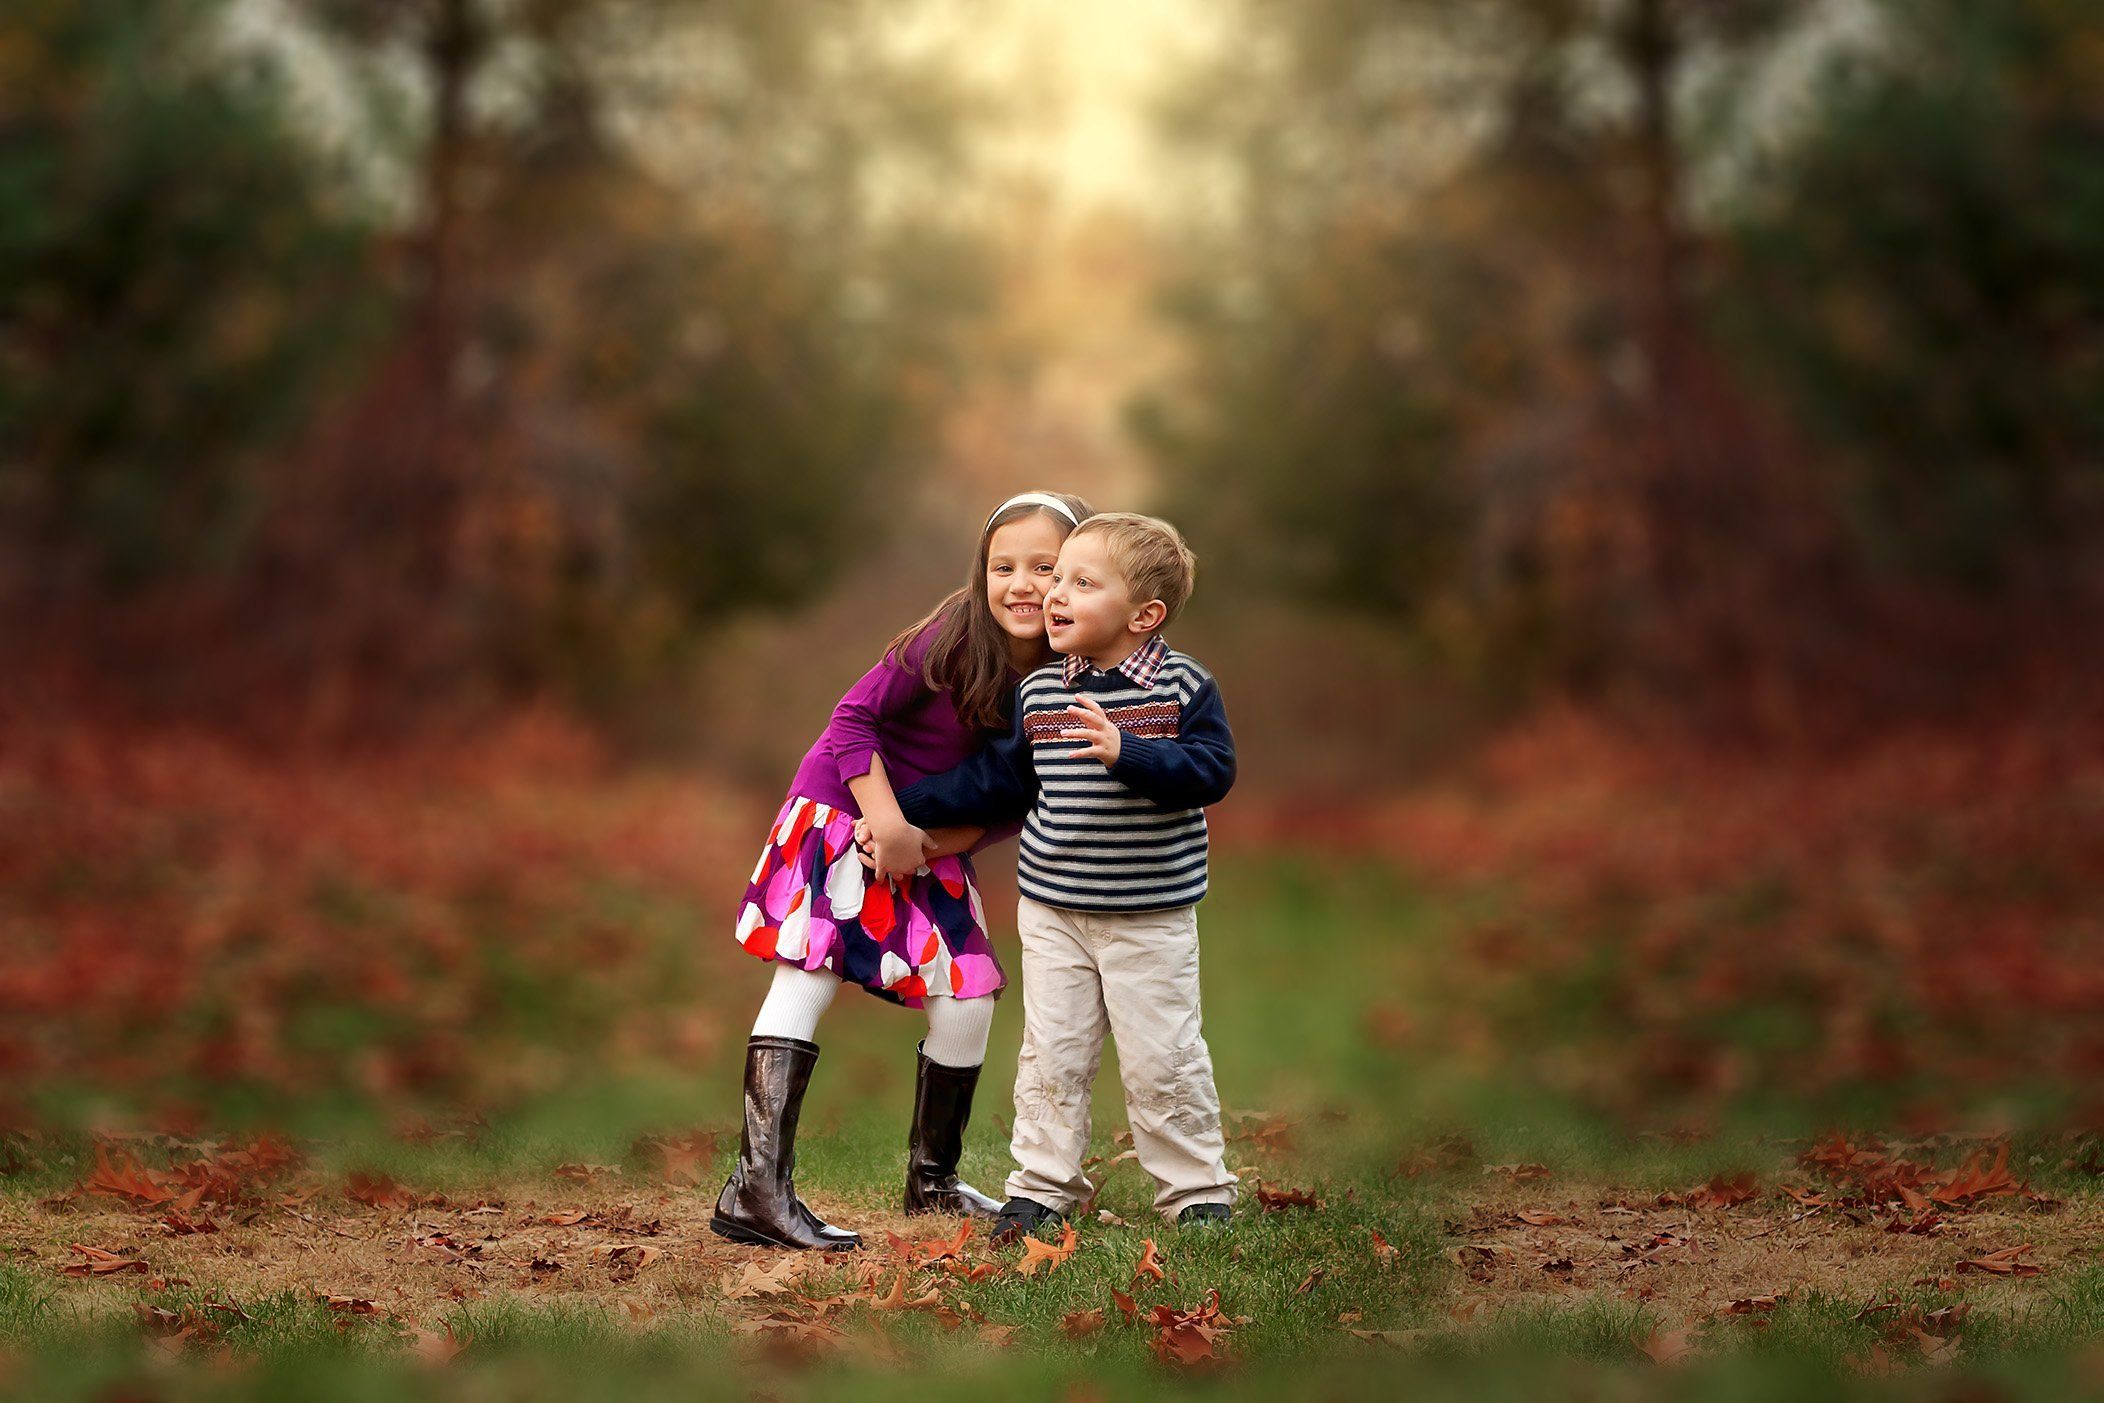 6 year old girl and 3 year old boy playing outside in the fall leaves